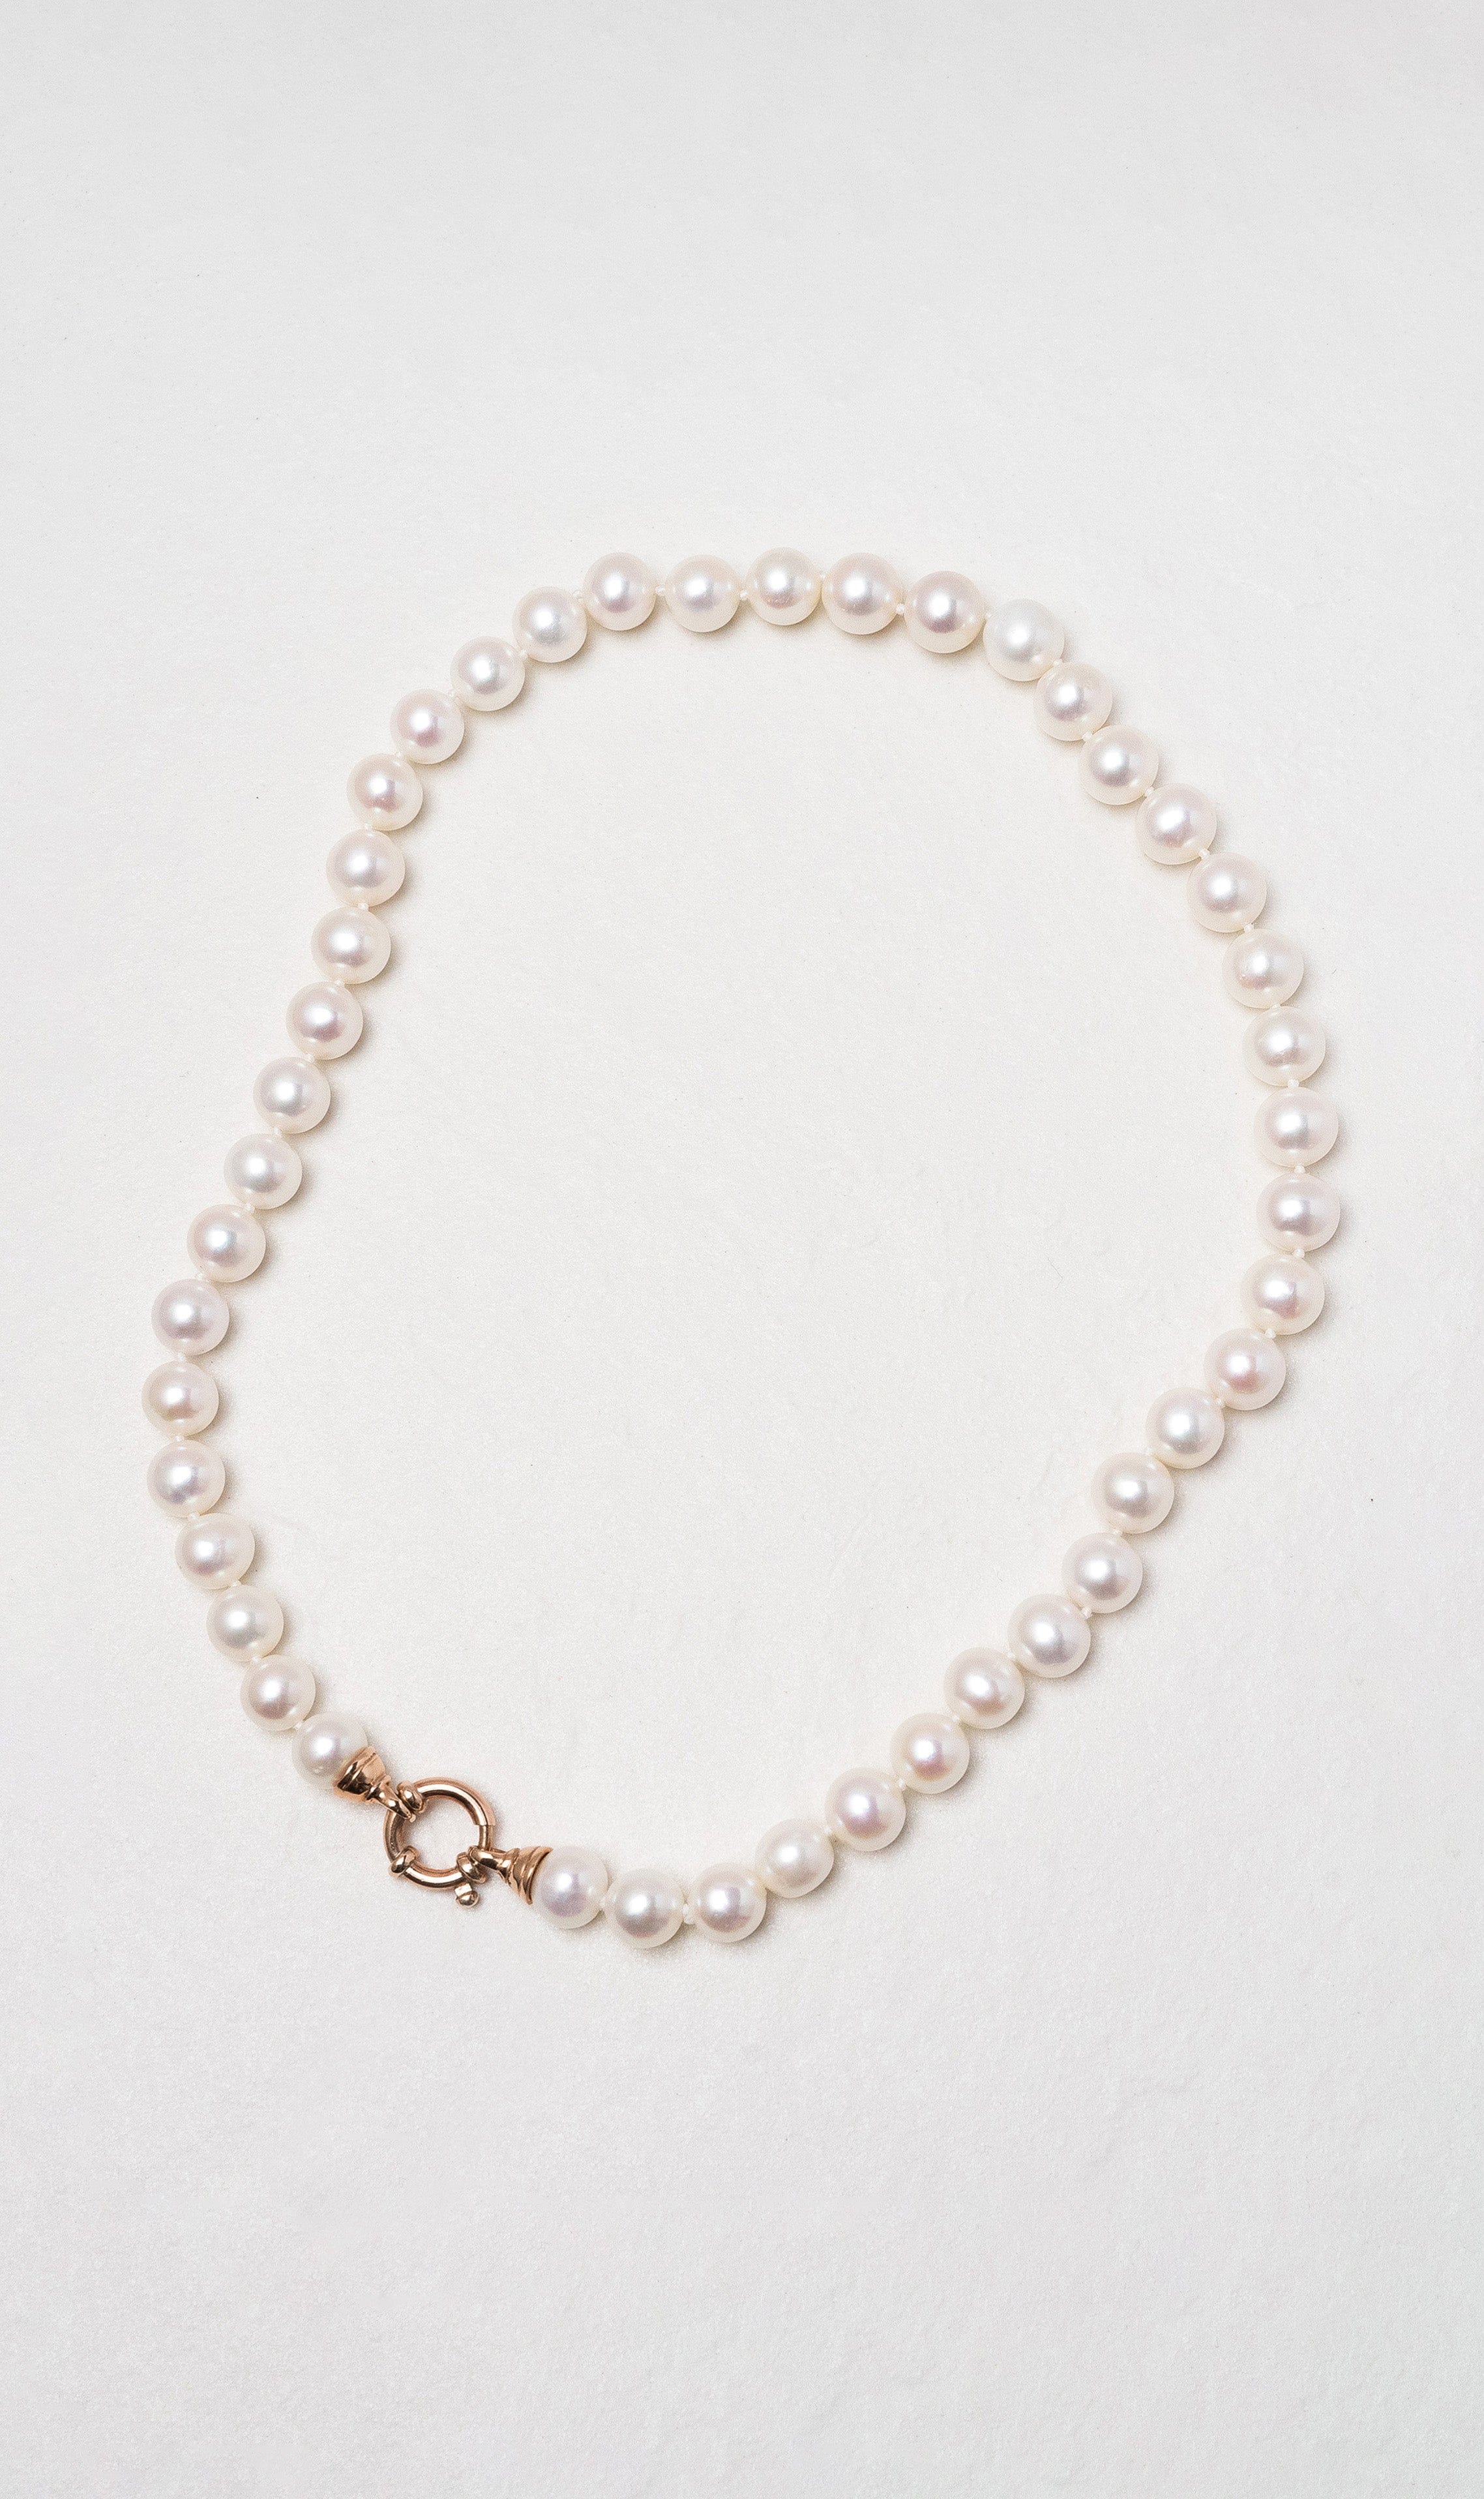 Hogans Family Jewellers 9K RG Freshwater Pearl Necklace with Euro Bolt Clasp